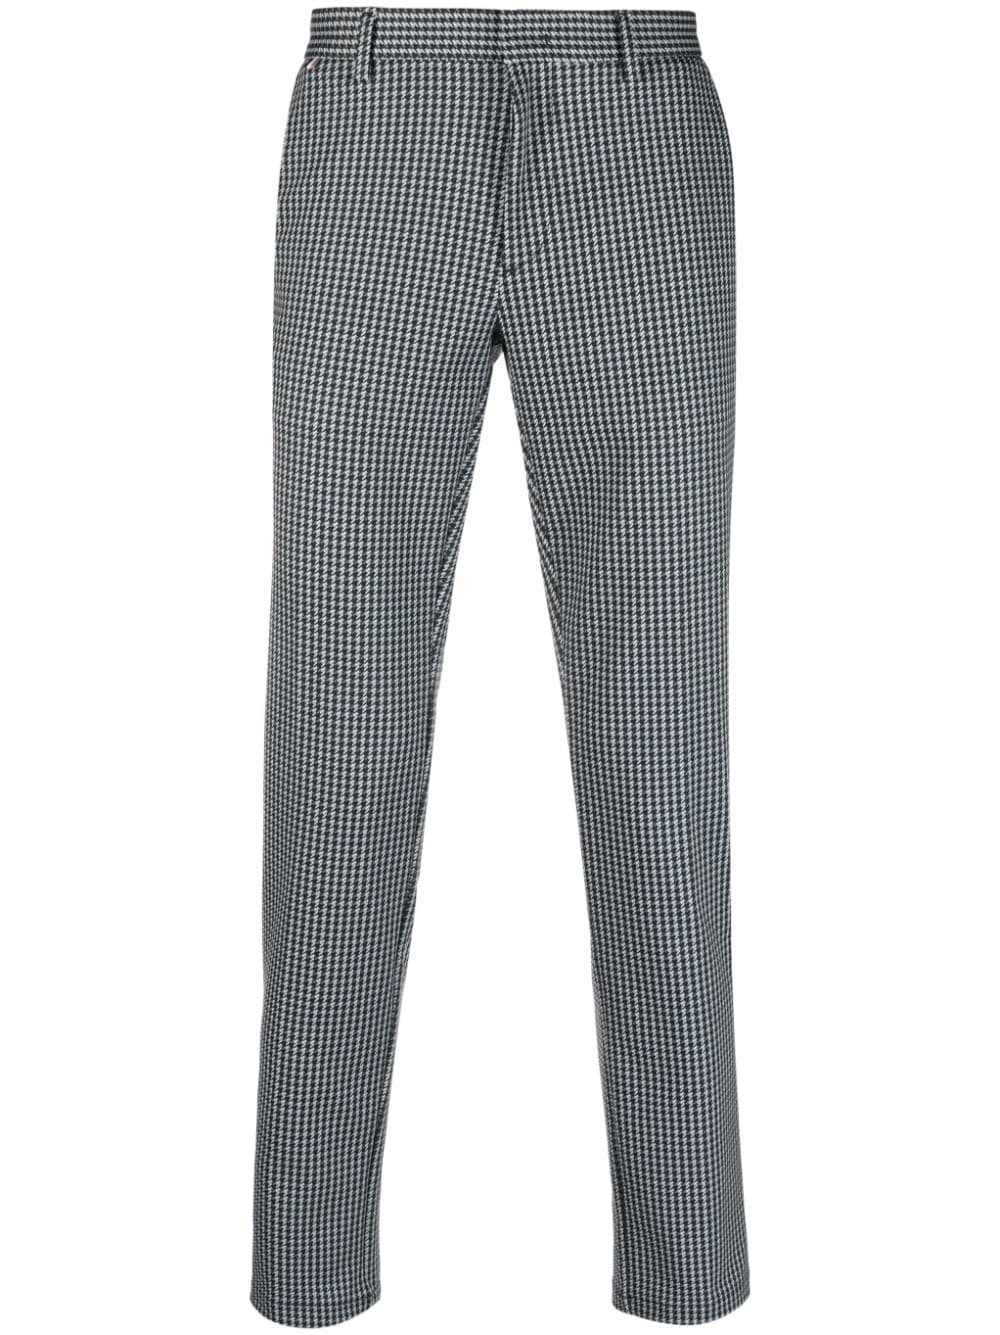 Hugo Boss Houndstooth Slim-fit Tailored Trousers In Black